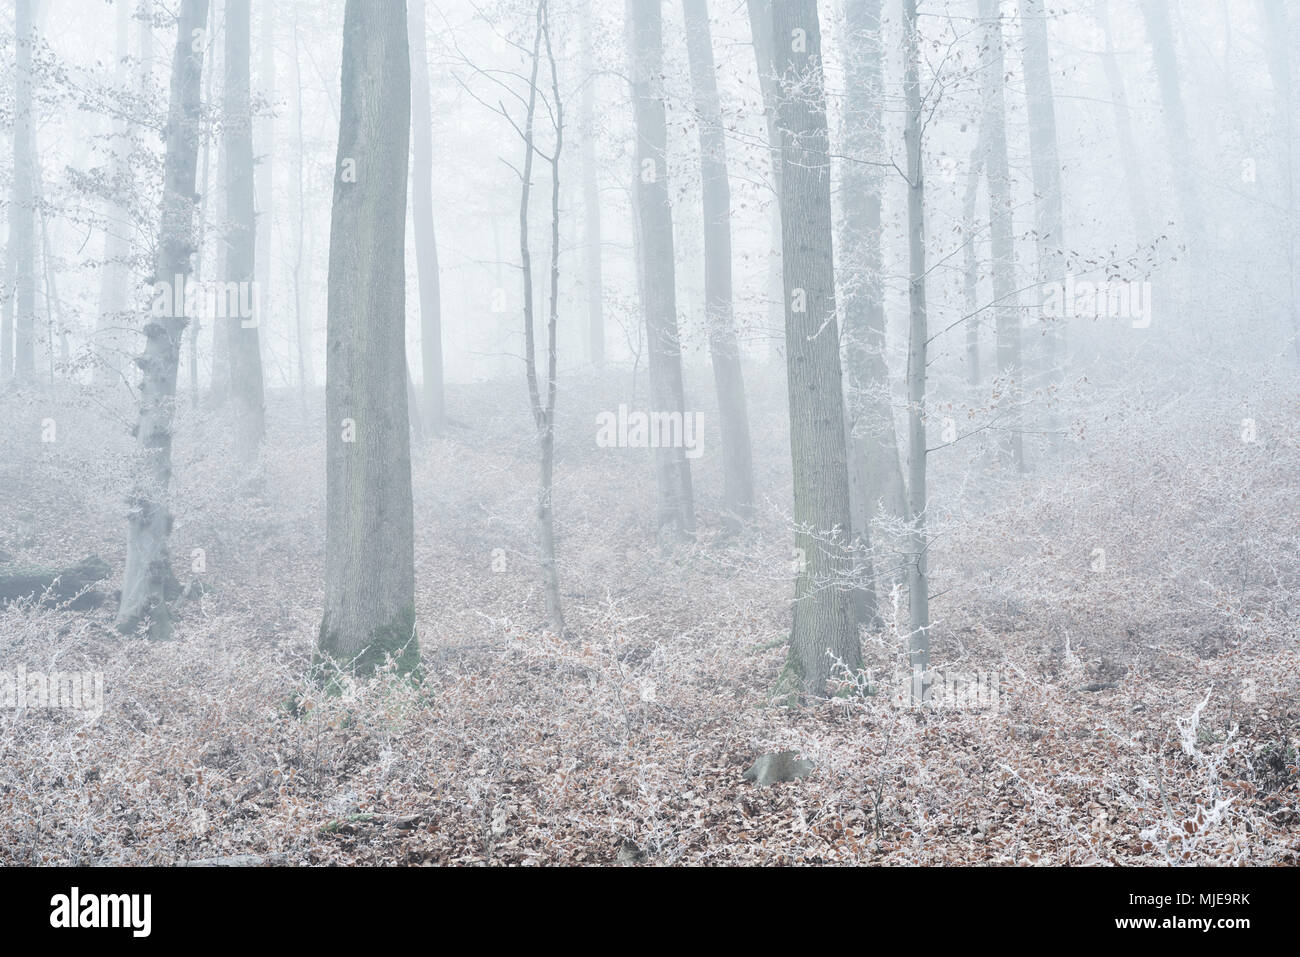 Forest with beeches in winter, hoarfrost and fog, Stock Photo